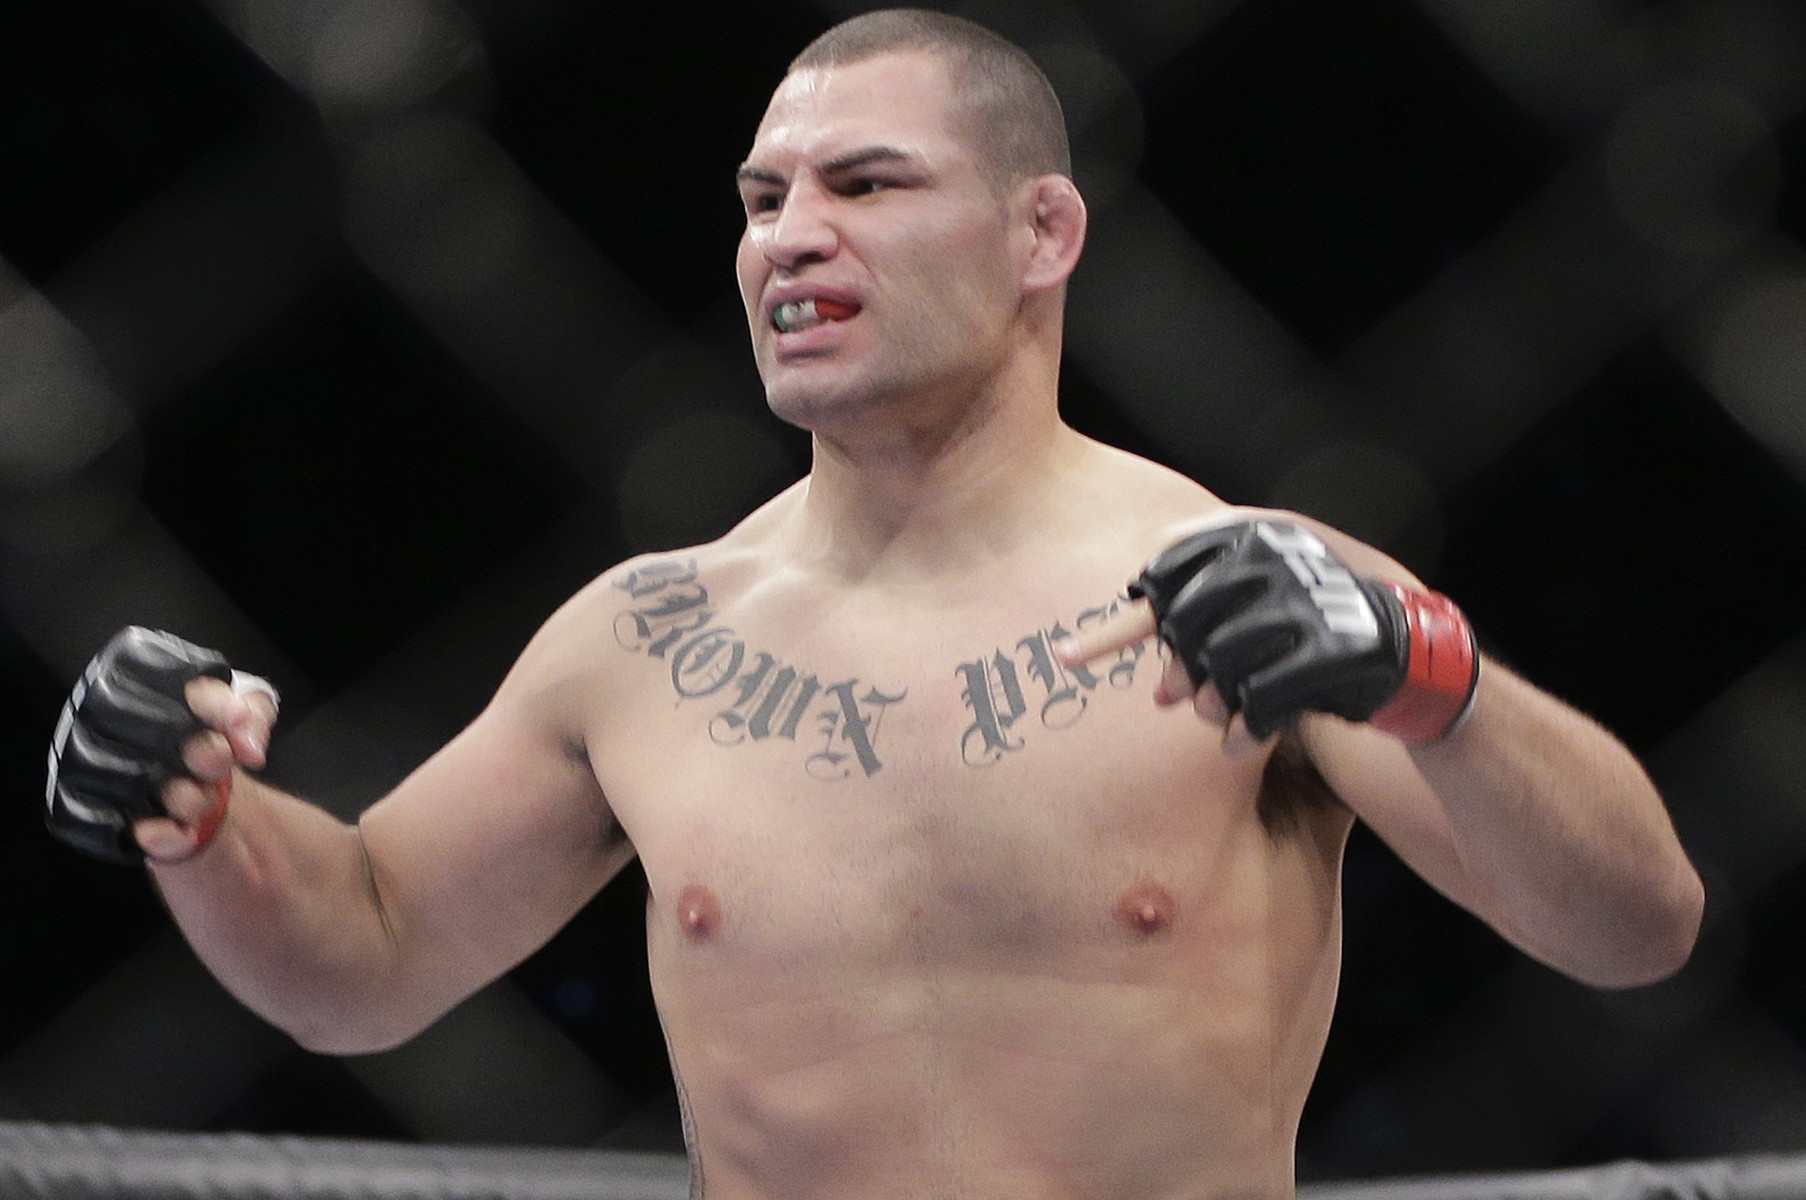 UFC heavyweight champion Cain Velasquez charged with attempted murder in California shooting